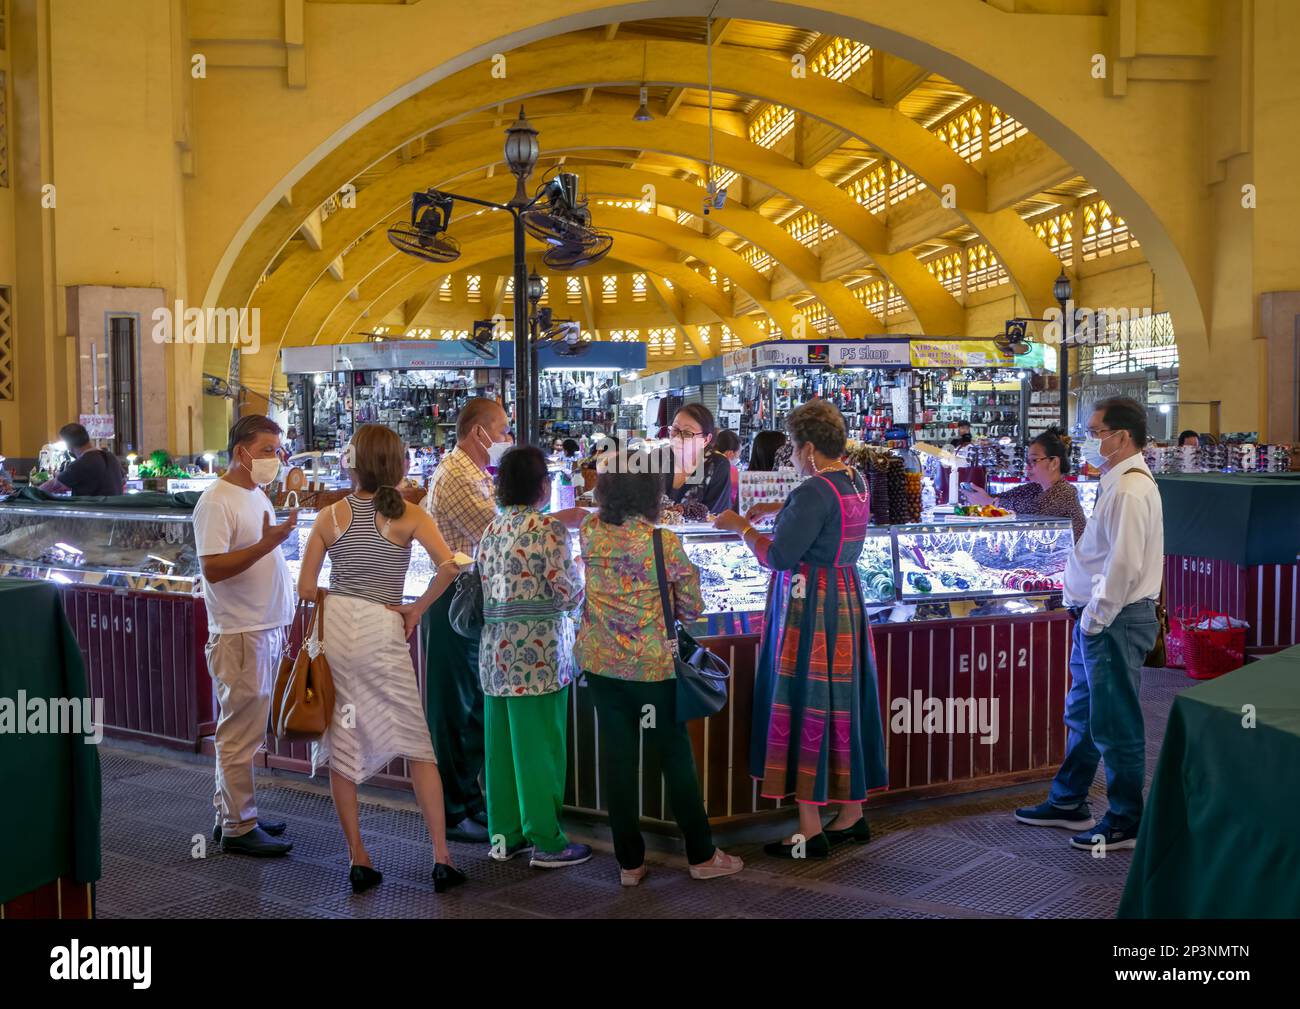 A group of middle-aged people shop at a jewellry stall inside the art deco Central Market in Phnom Penh, Cambodia. Stock Photo